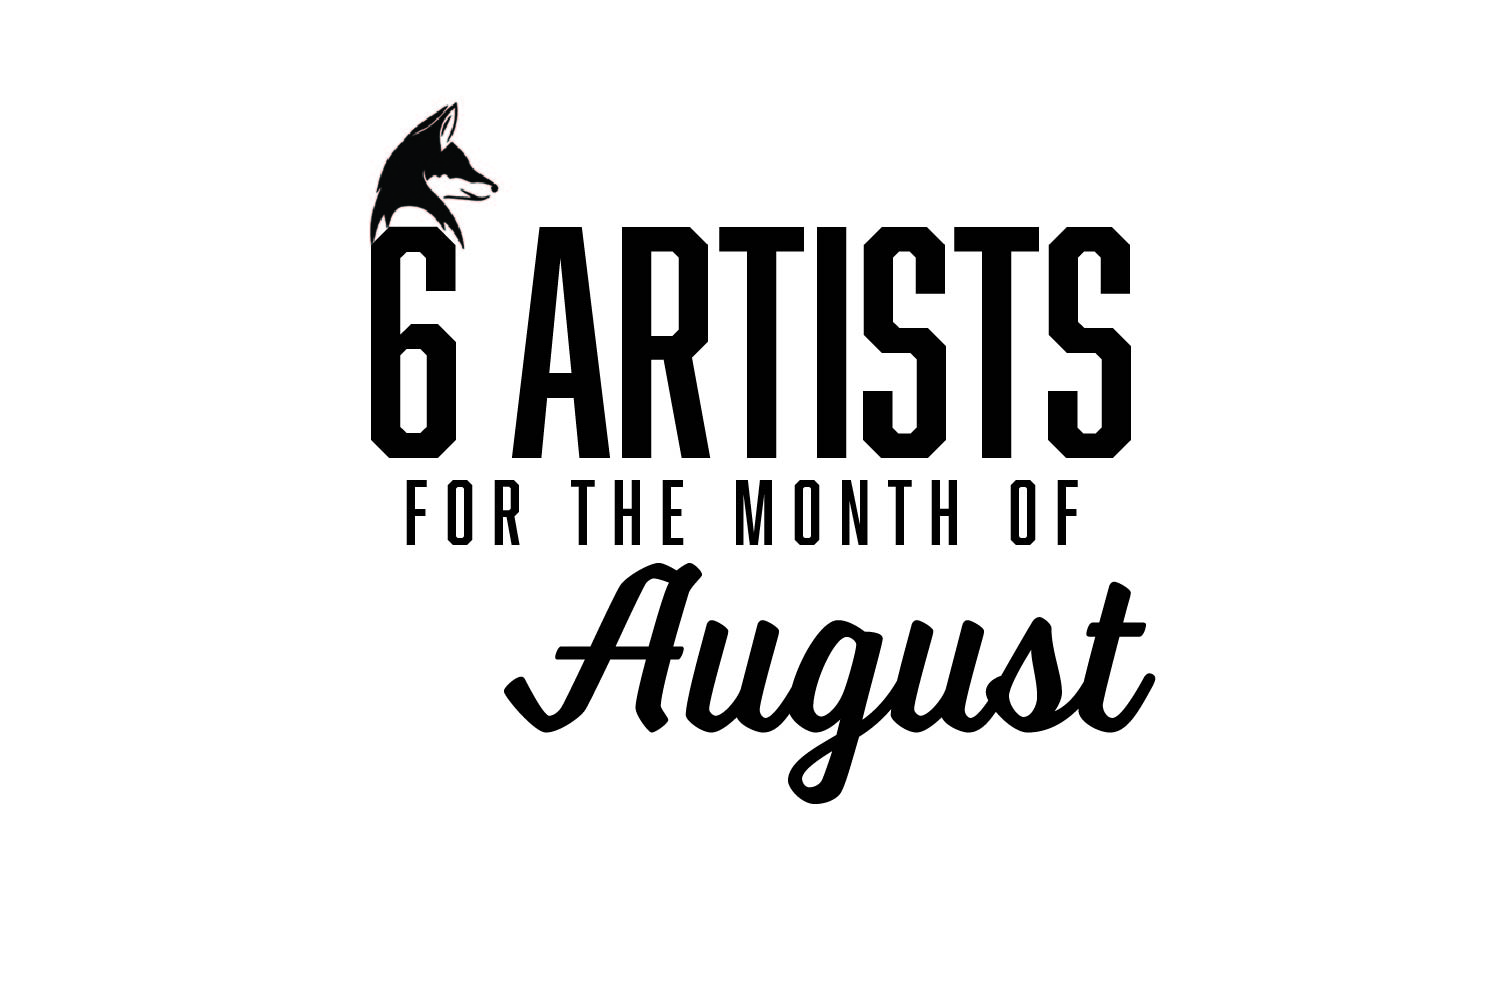 Six+artists+you+should+be+listening+to%3A+August+2020+edition